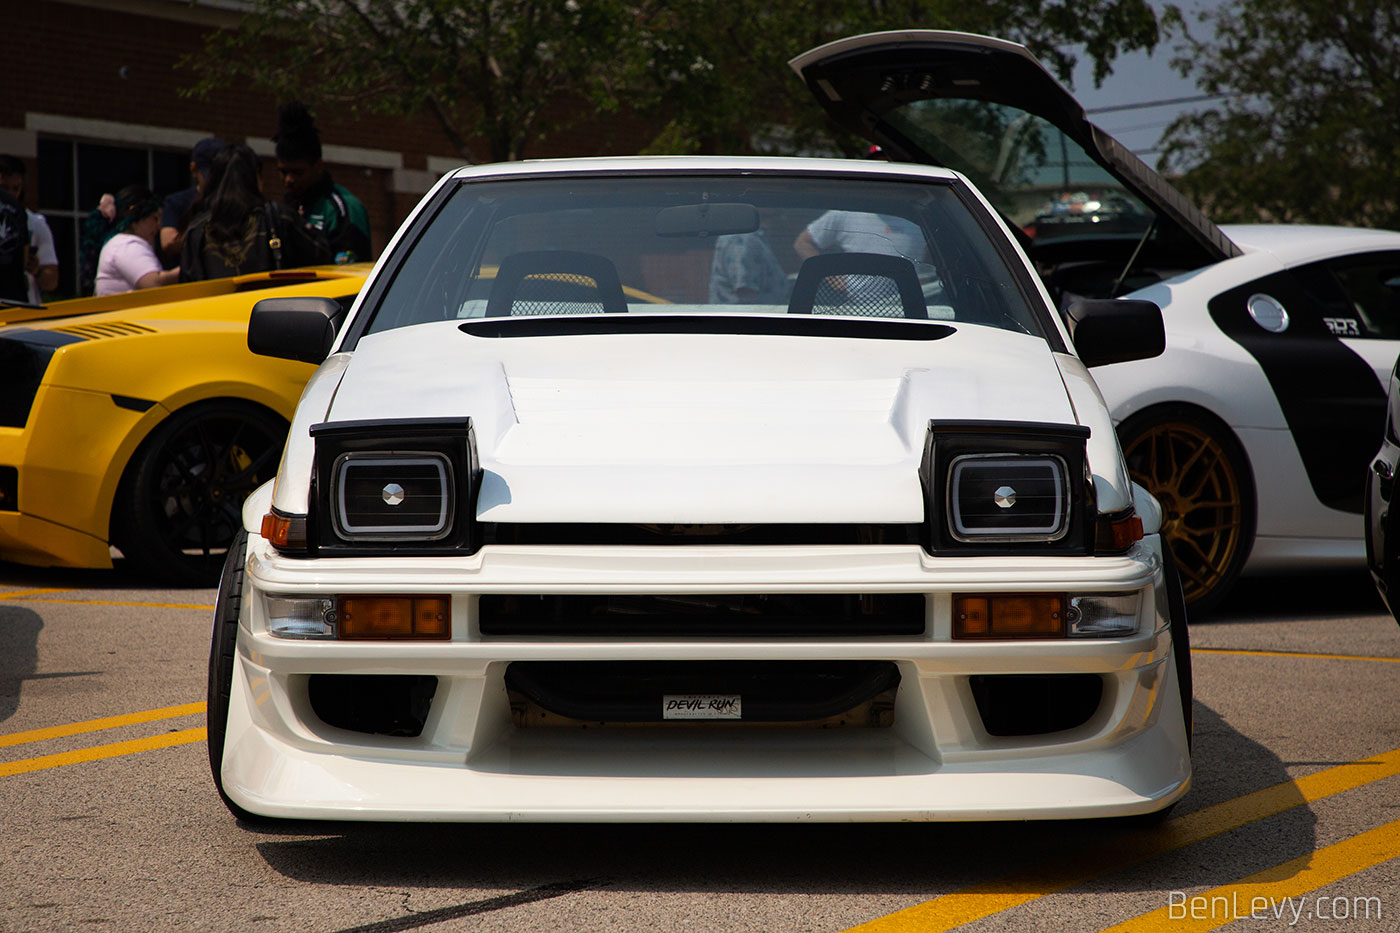 Front of AE86 Corolla with Headlights Up